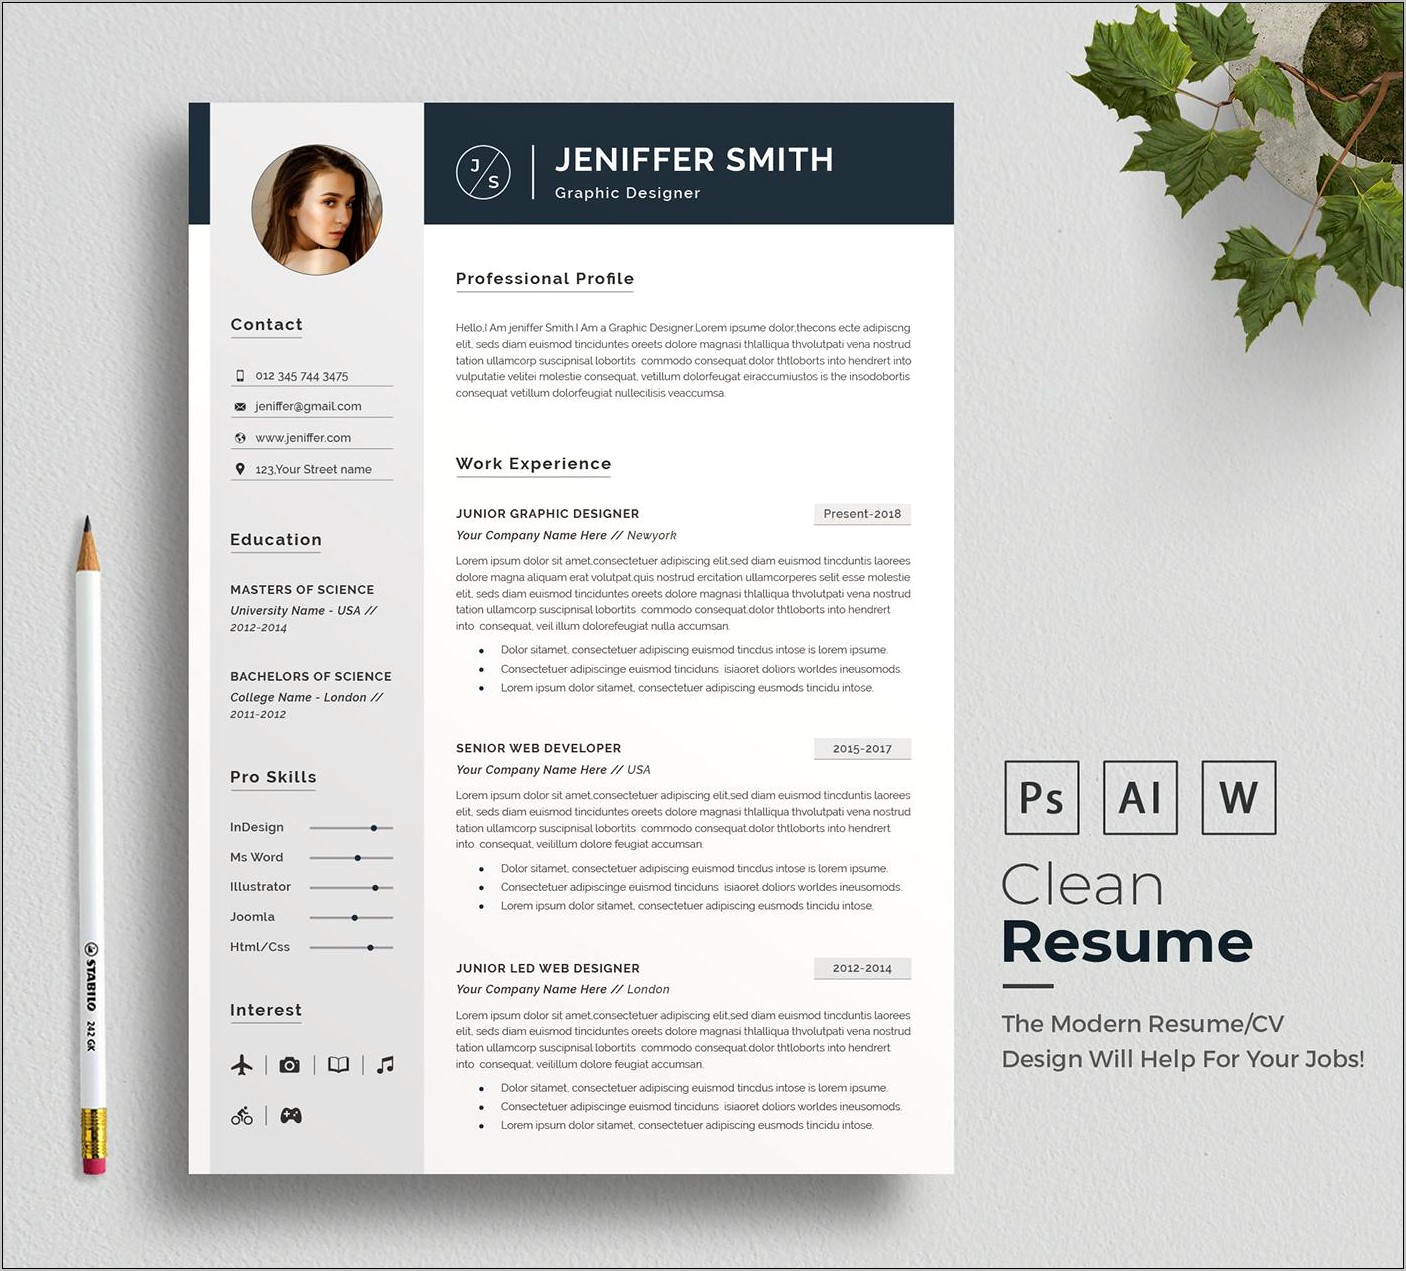 Are There Resume Templates In Word